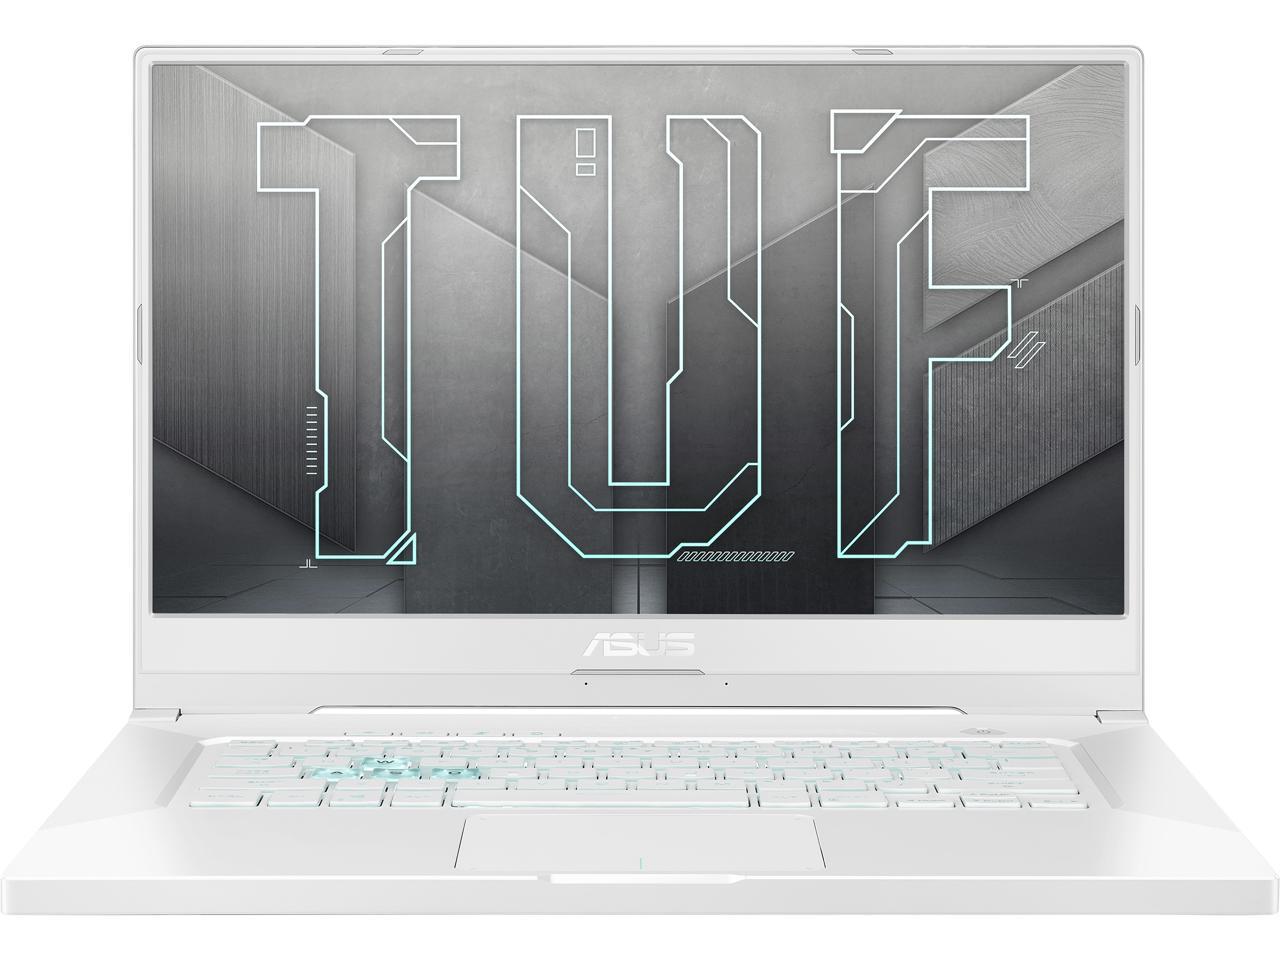 RTX 3070 Gaming Laptop for $1399,  1TB PCIE, 240hz panel